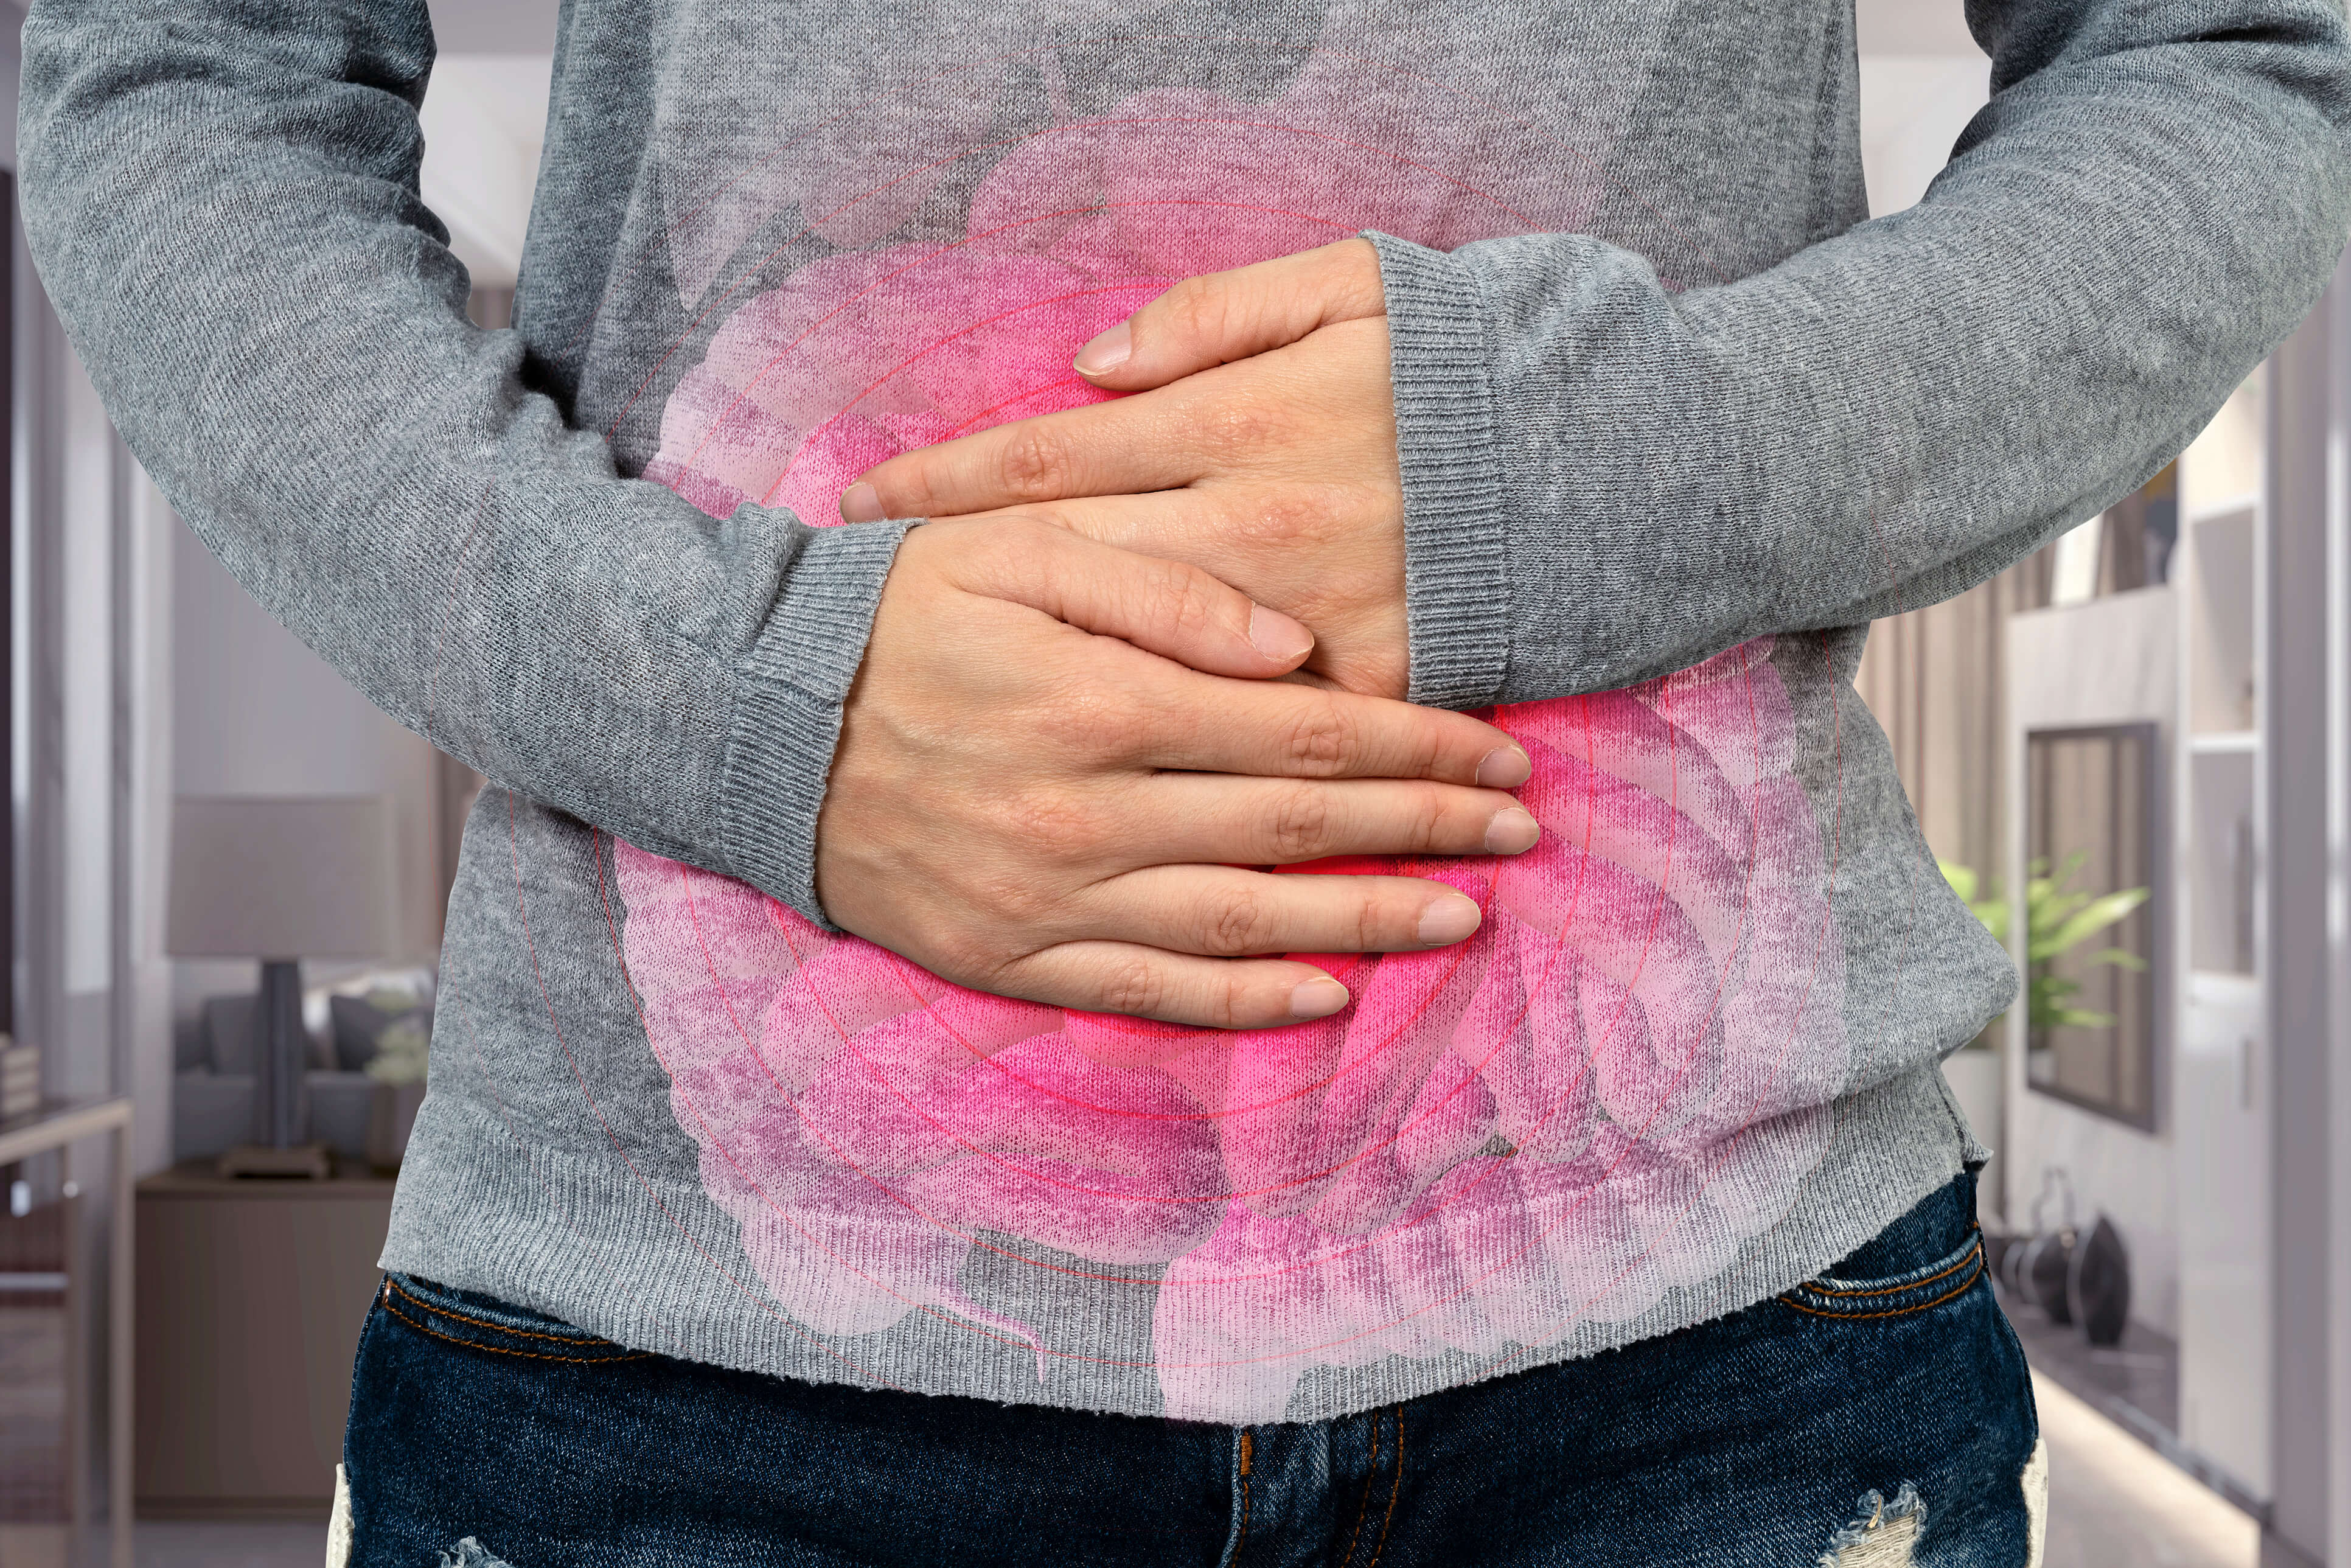 How to Heal Leaky Gut and Strengthen Your Microbiome